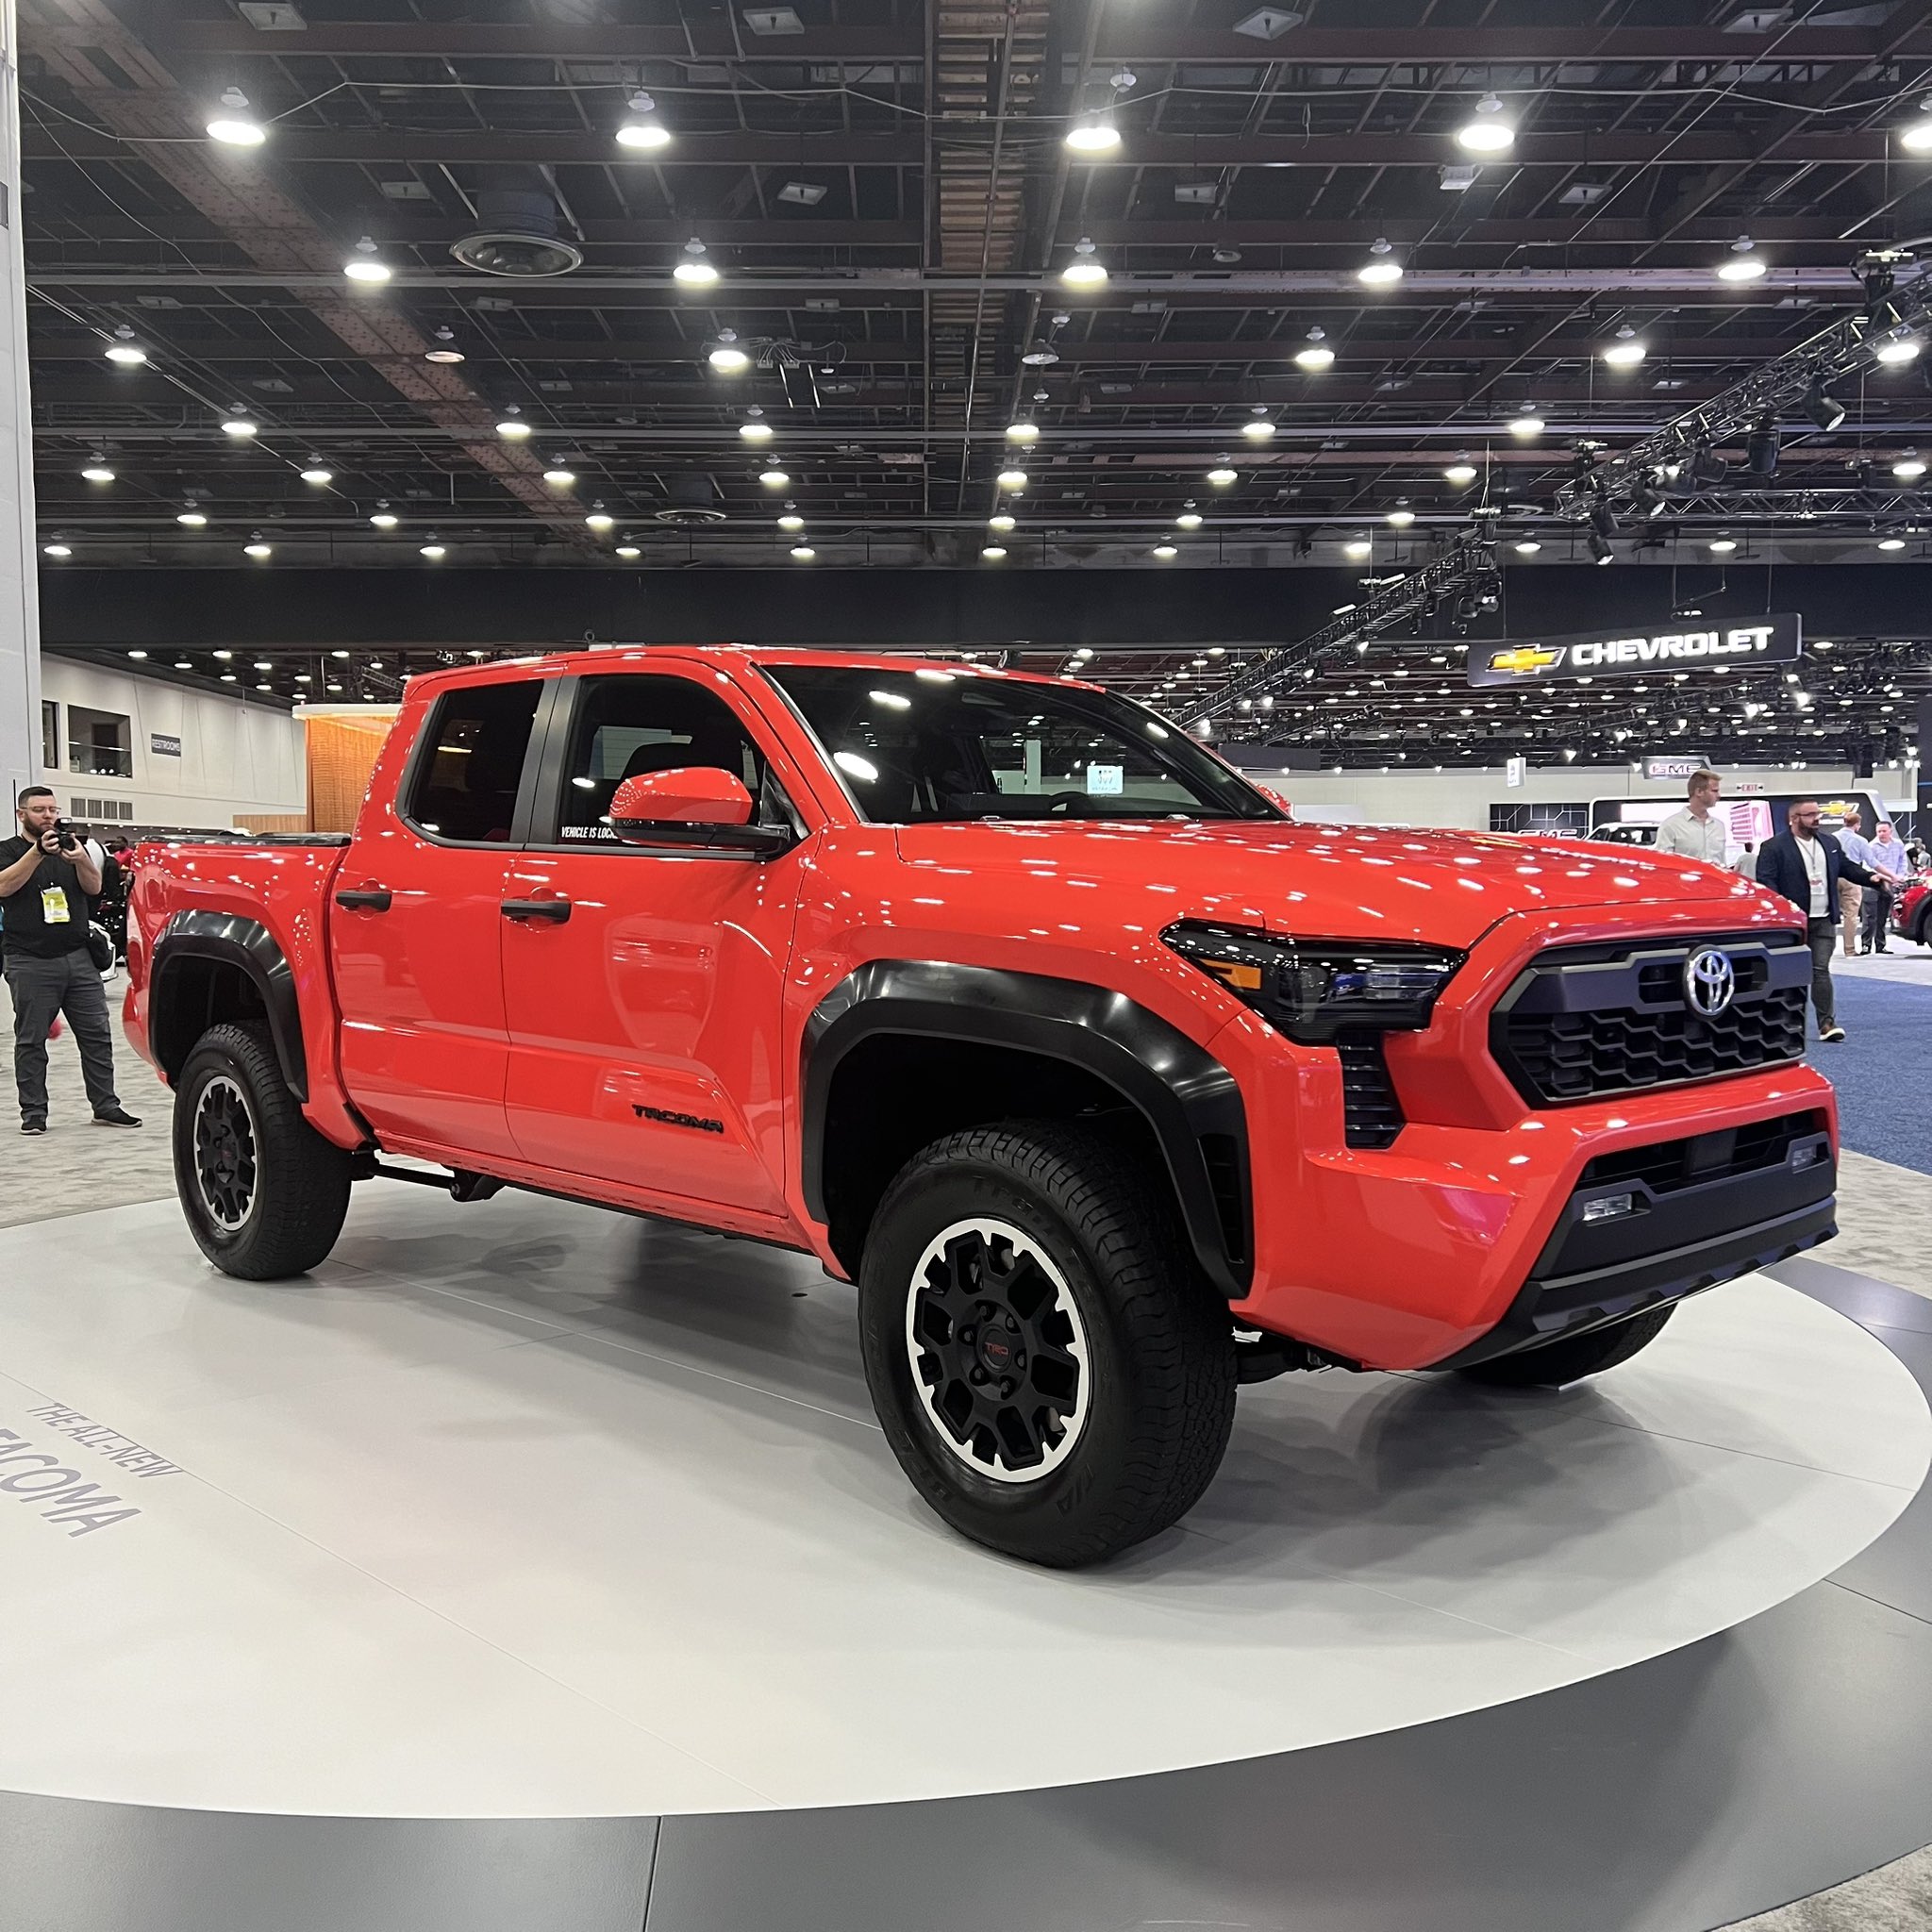 2024 Tacoma [Update: QR loads 2023 page] 2024 Tacoma Pricing Revealed ($28,600 MSRP) or Marketing Error? 2024 Tacoma Detroit Auto Show 2023 4